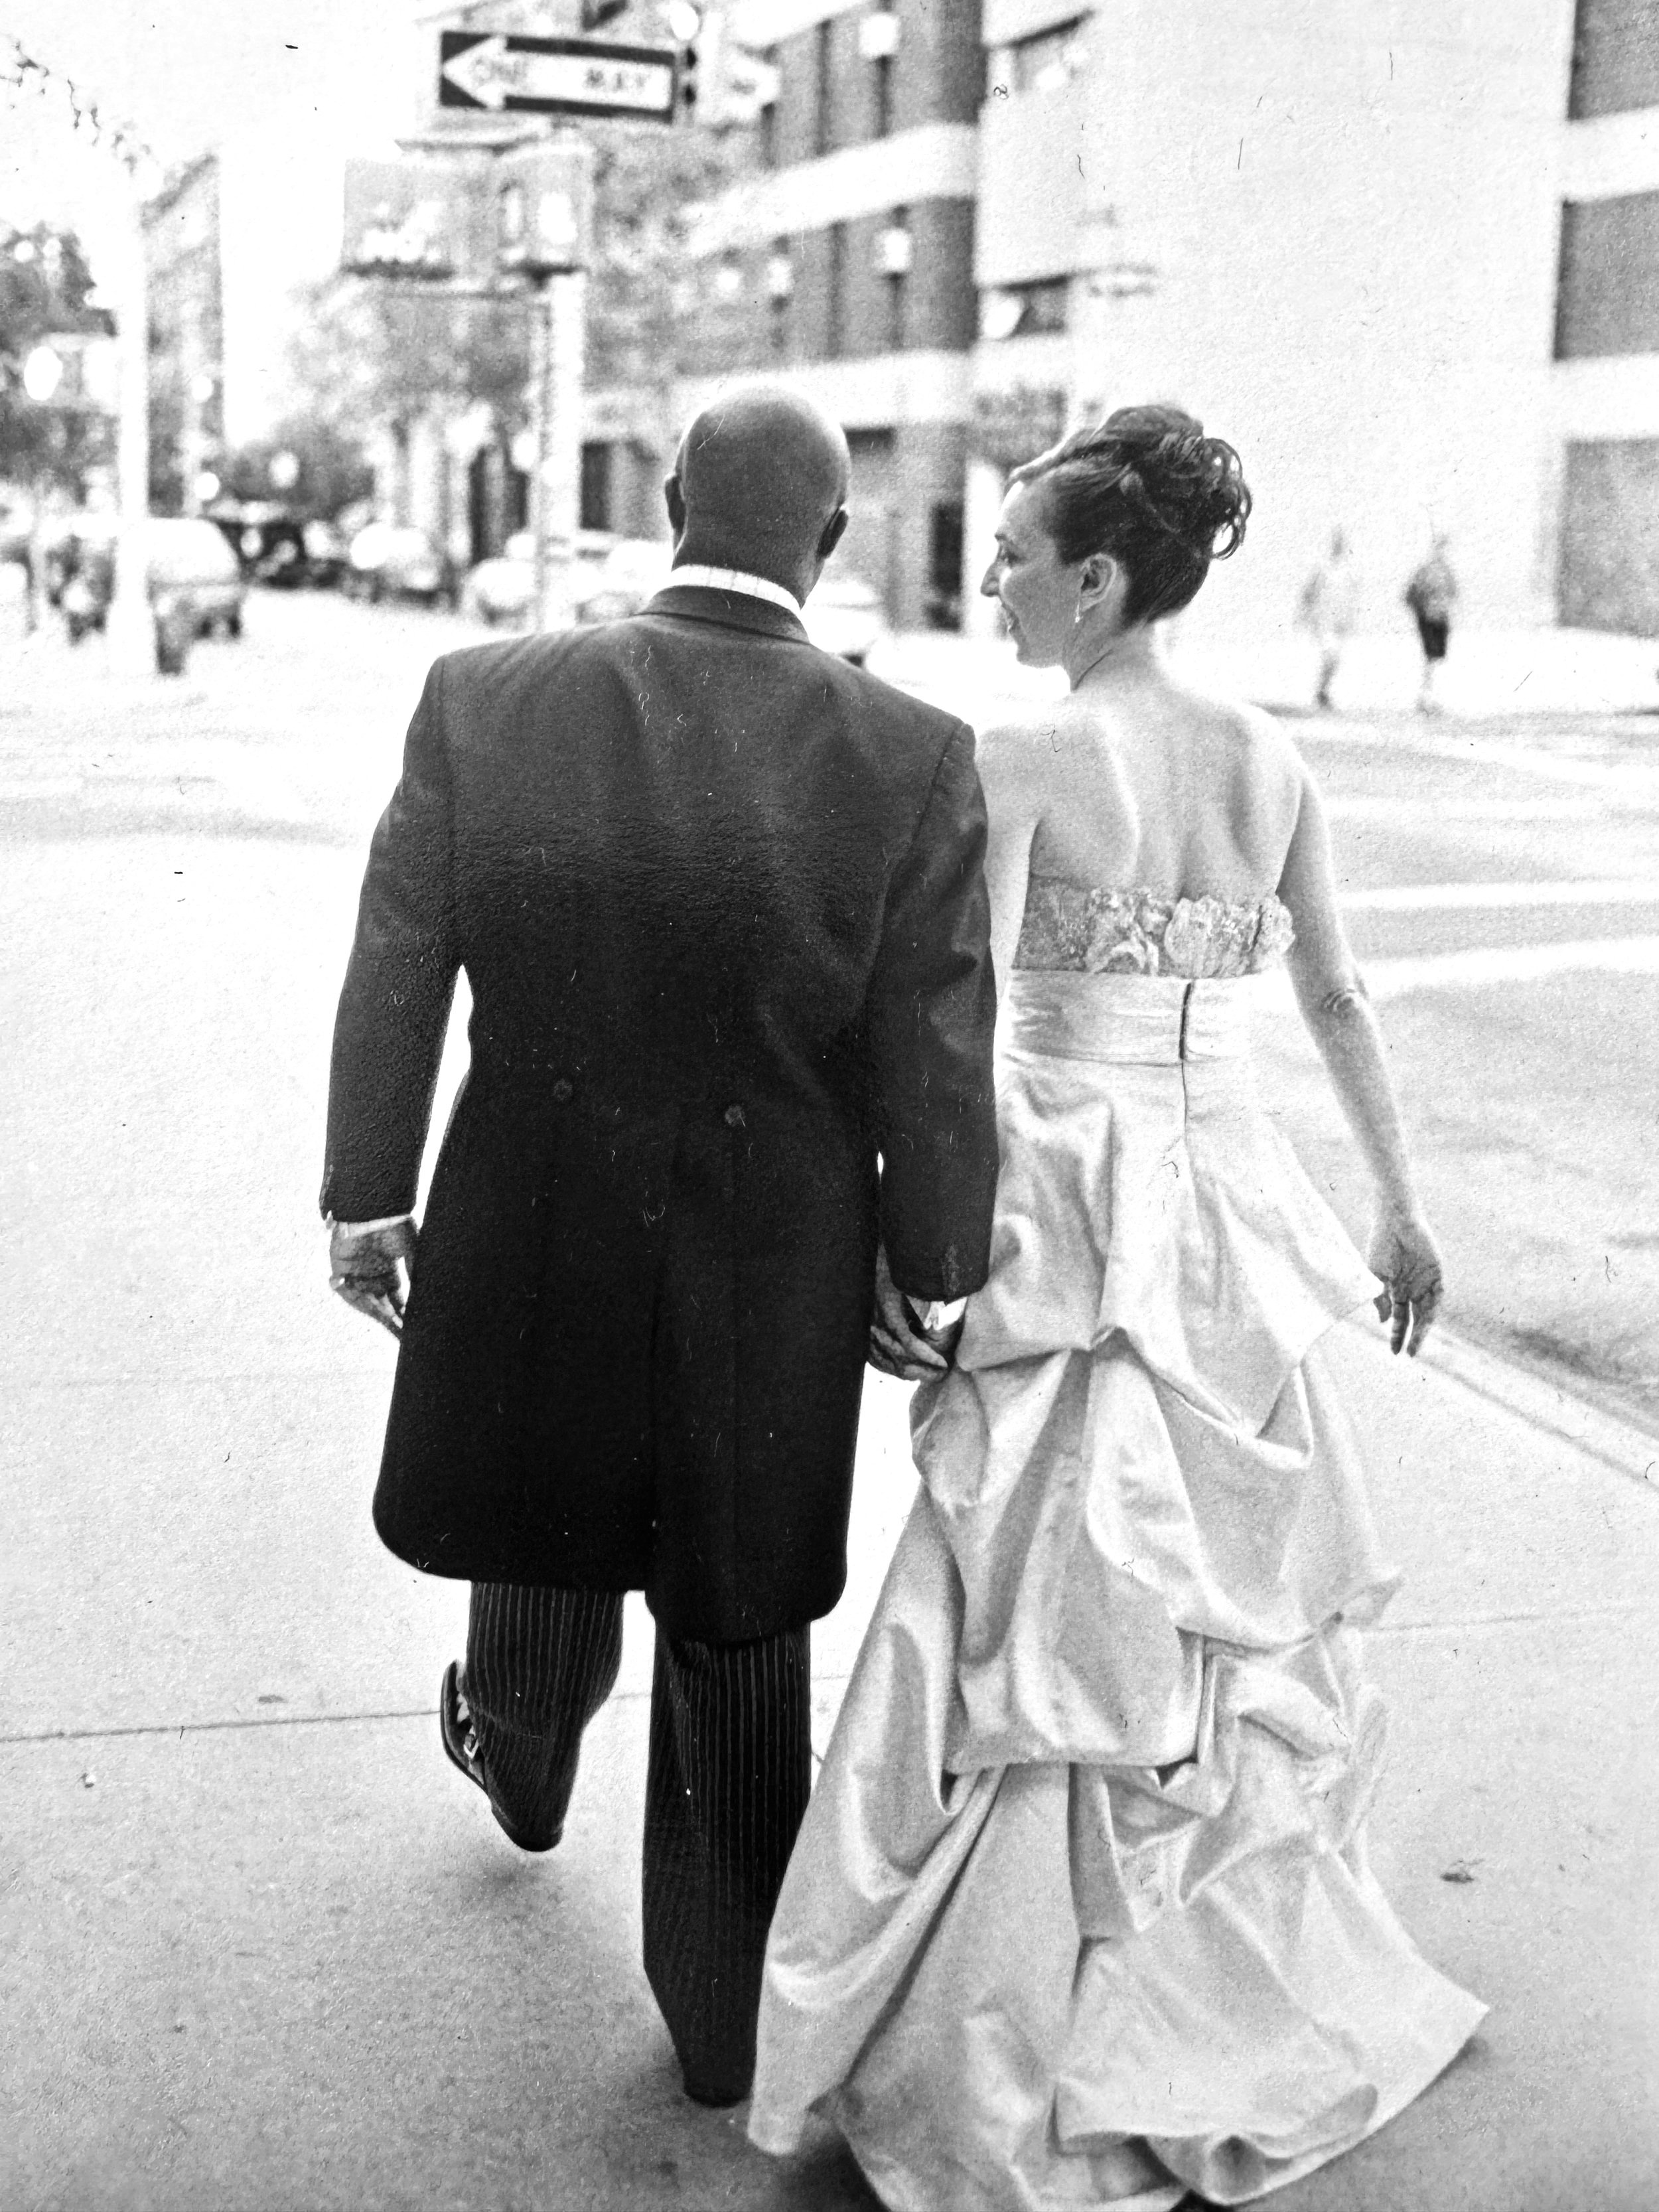 Their first married walk together.